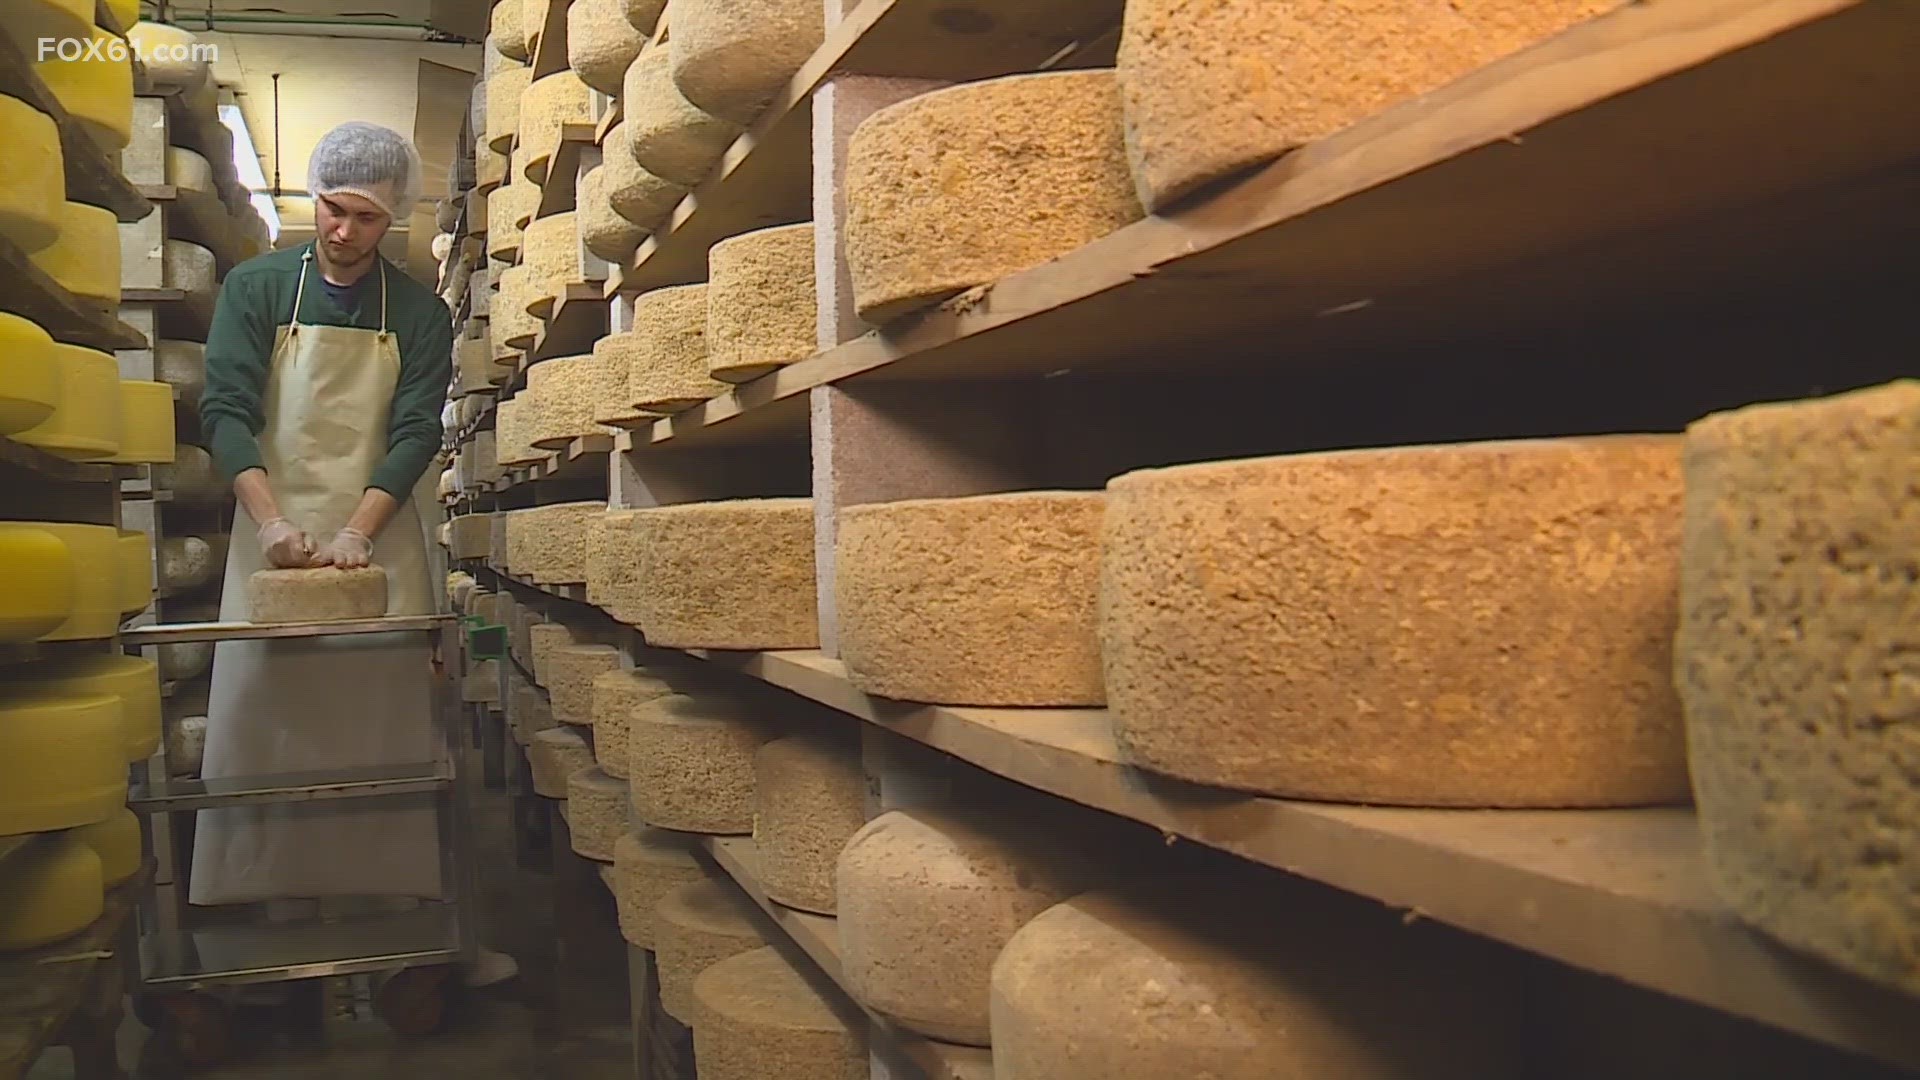 The Colchester business was named one of the top 50 cheesemakers in the country by Food and Wine Magazine.